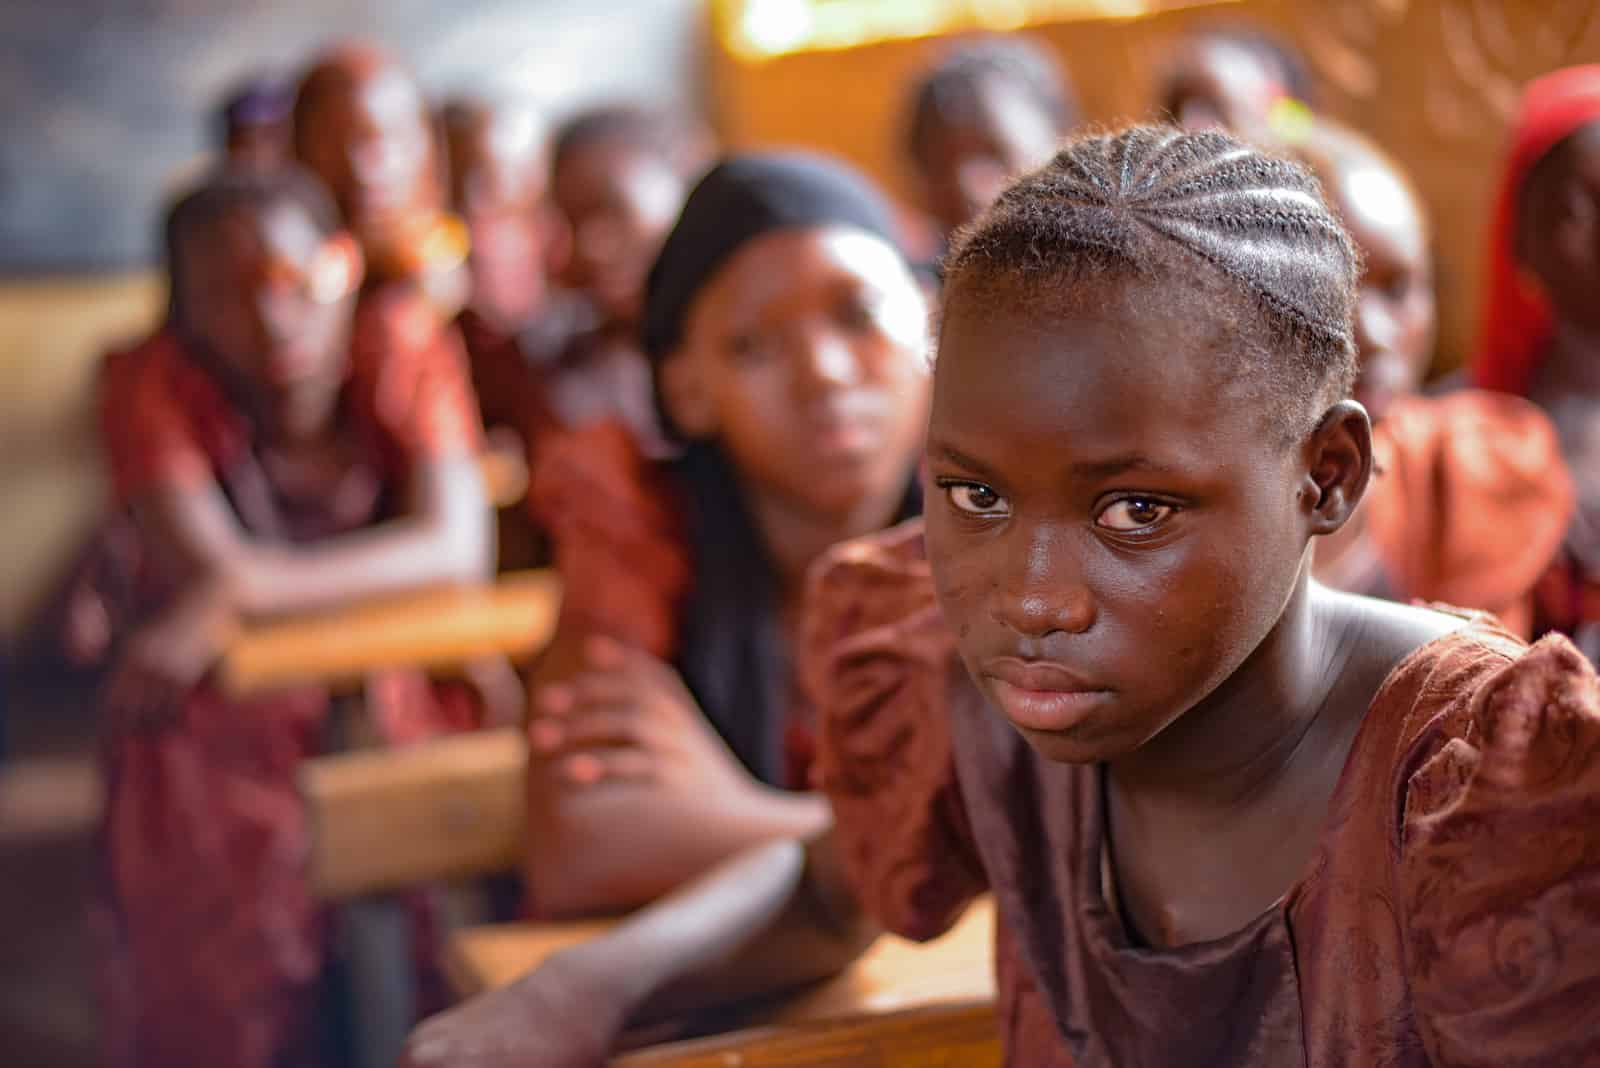 A girl in a brown dress sits in a classroom, looking somber. 